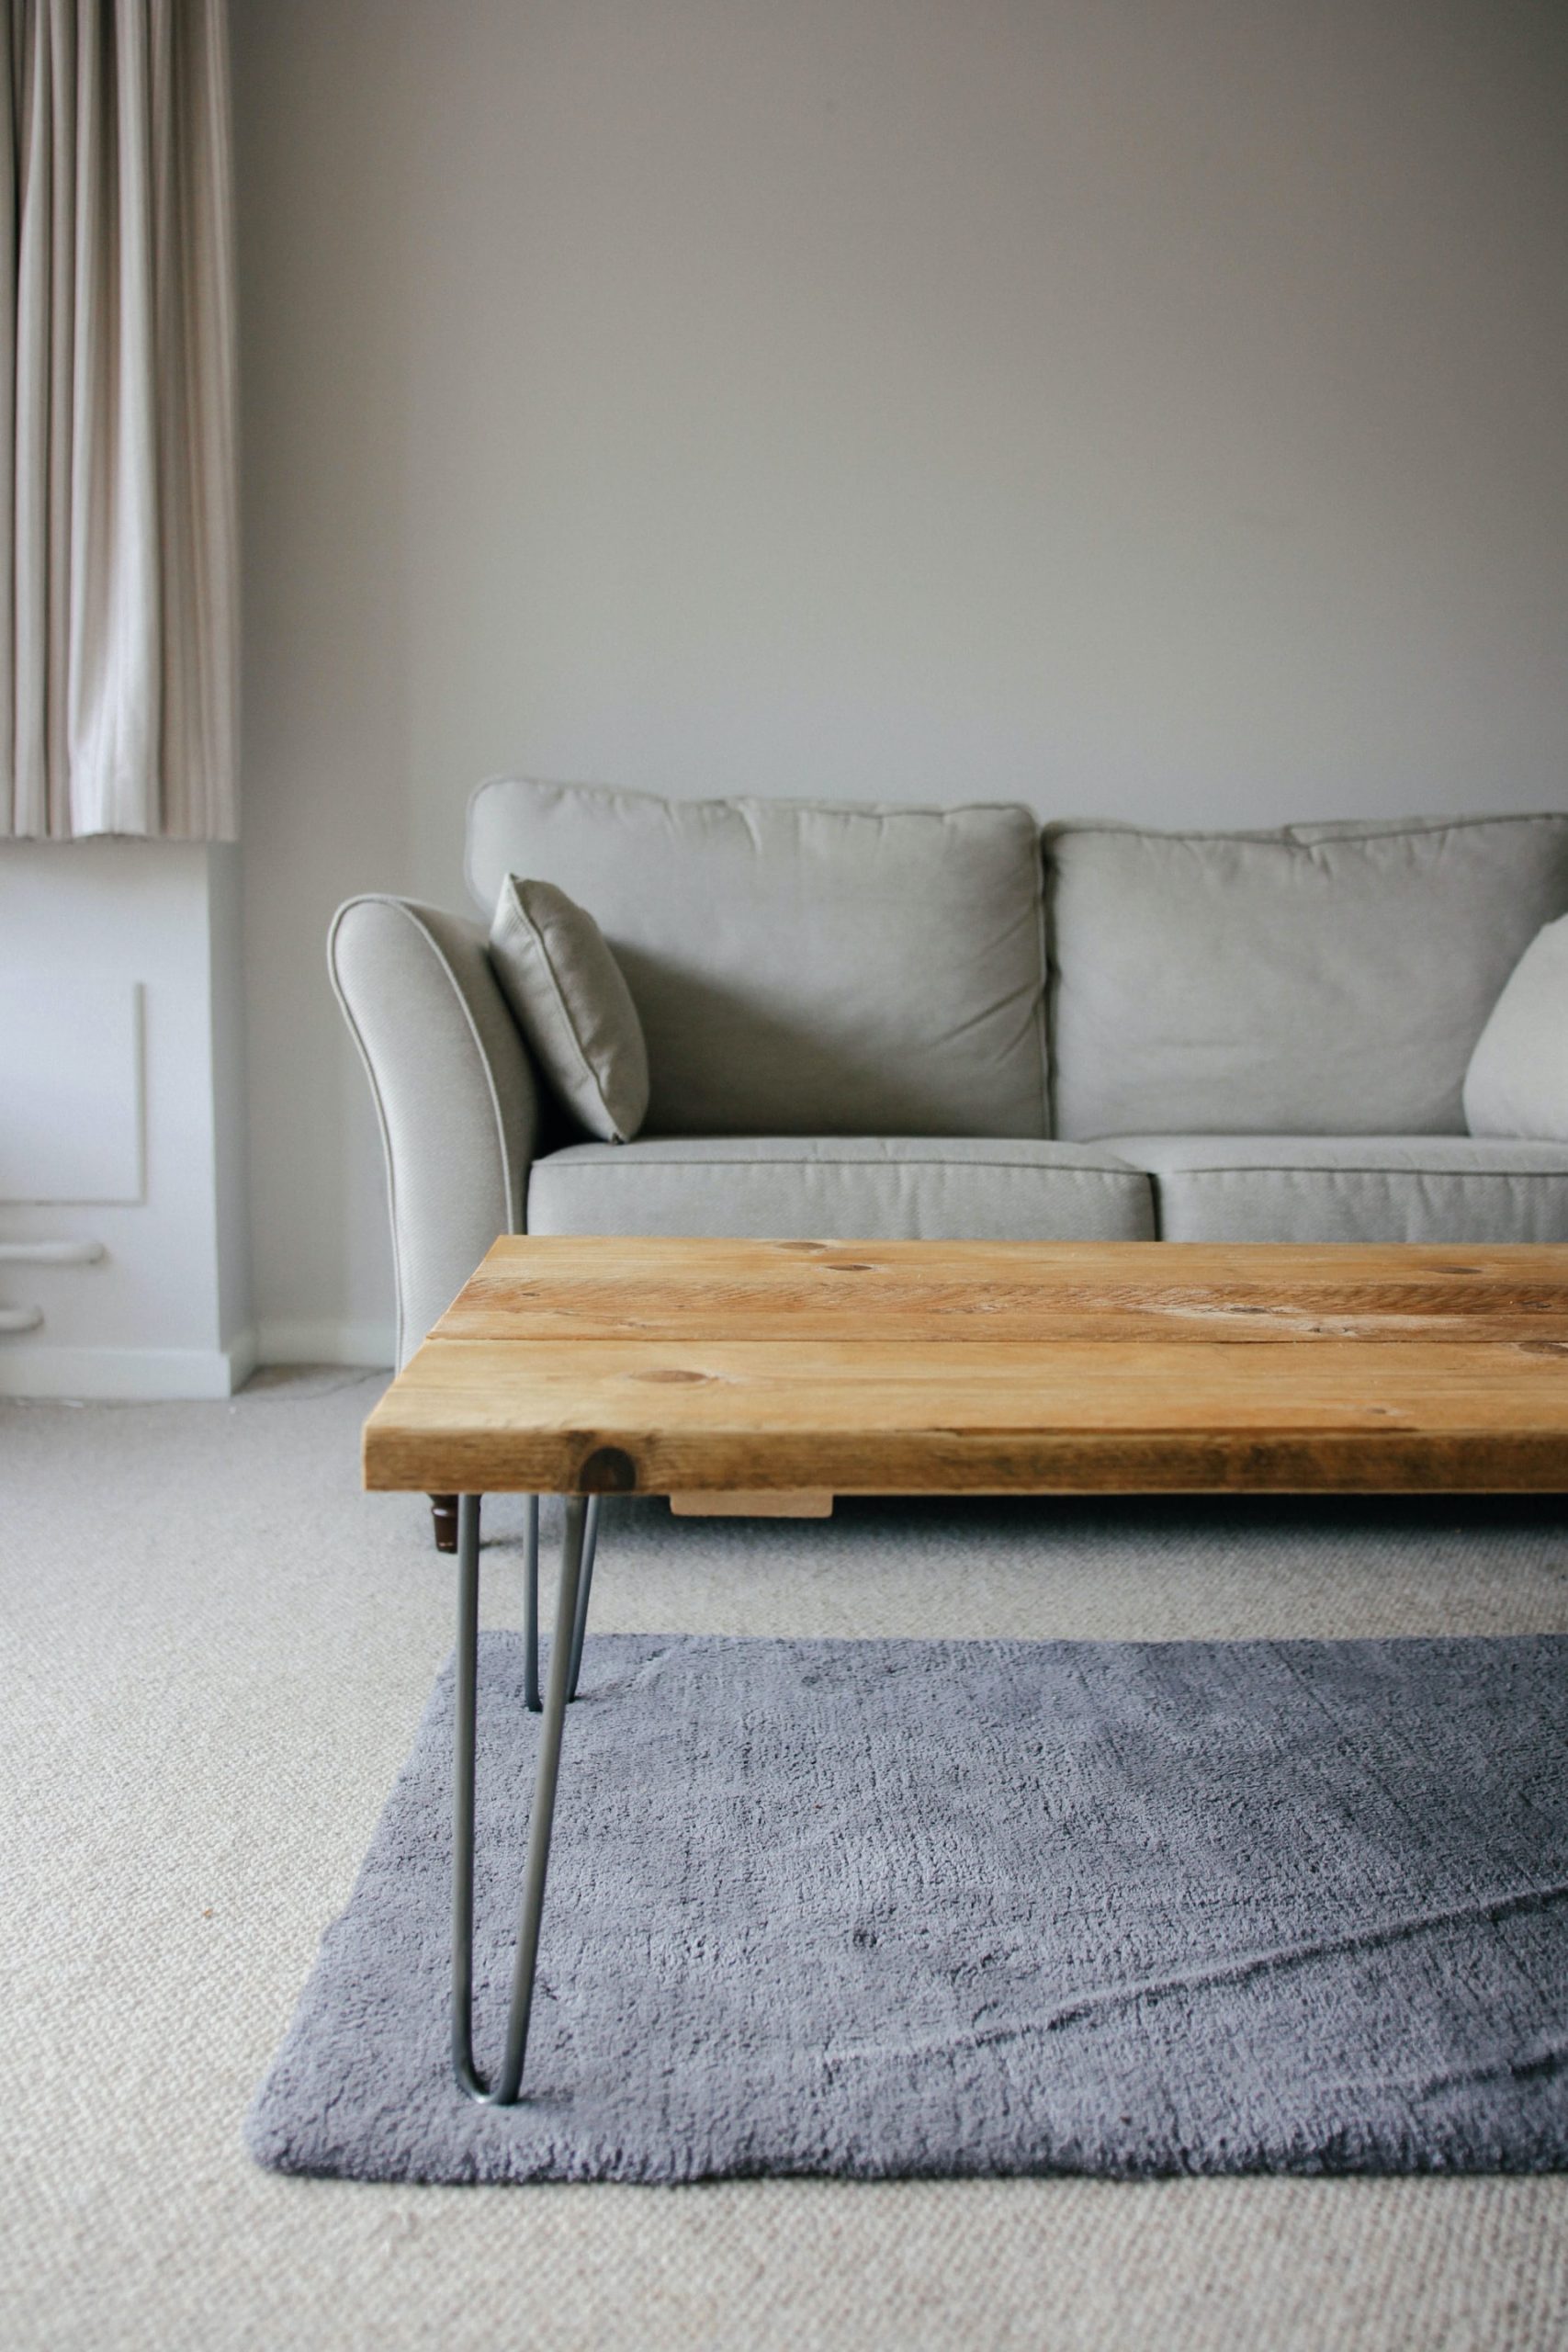 Functional and Fashionable: The Importance of a Good Coffee Table